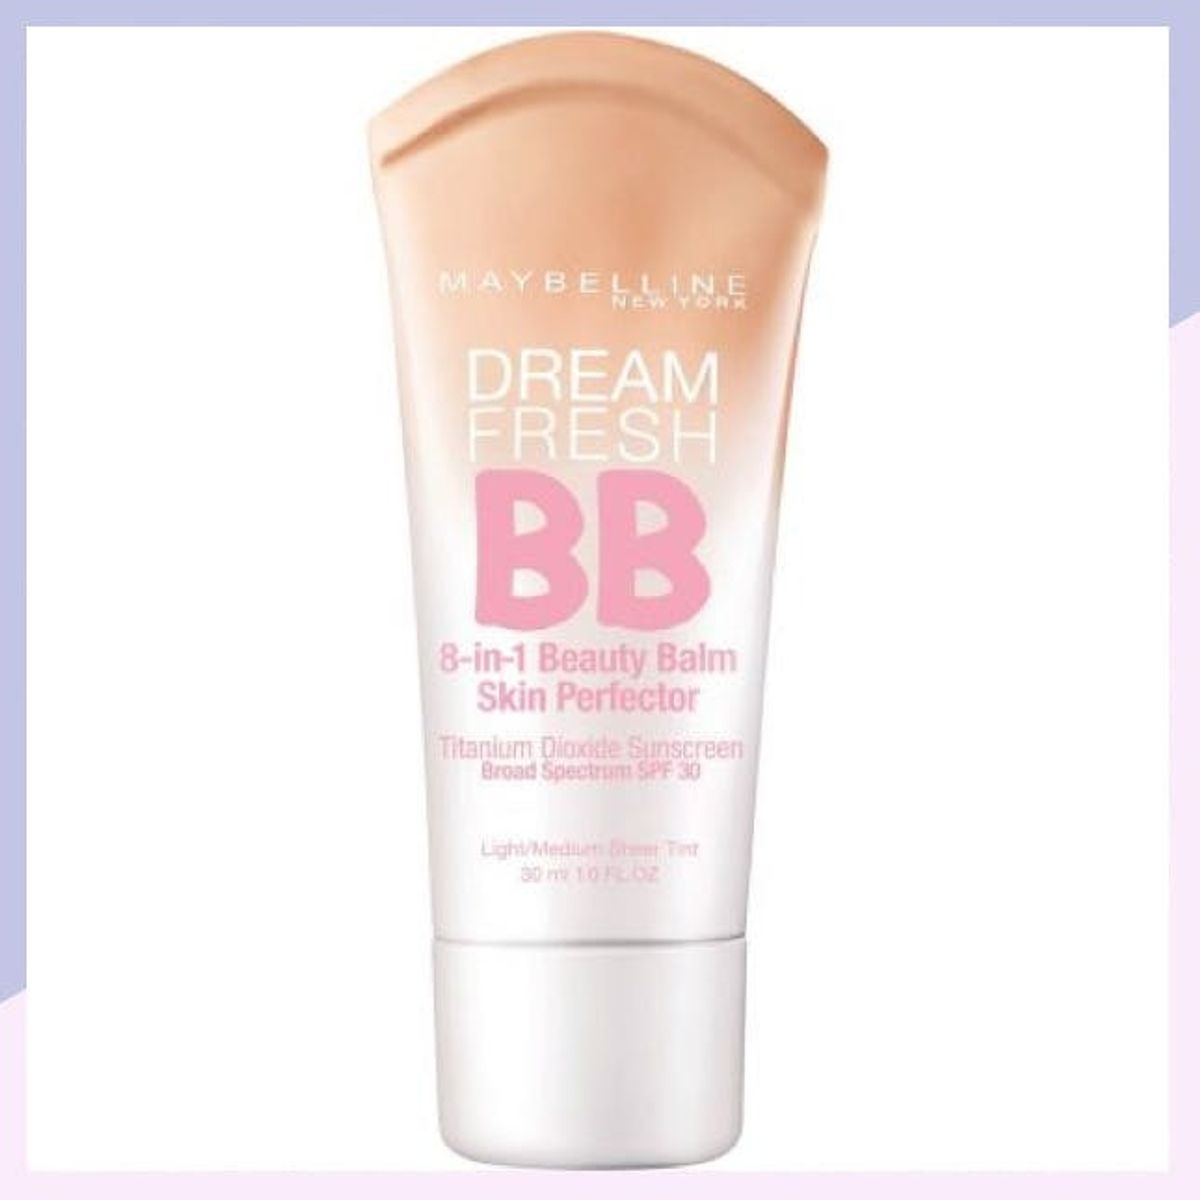 The Most Popular SPF Beauty Buys at CVS This Summer